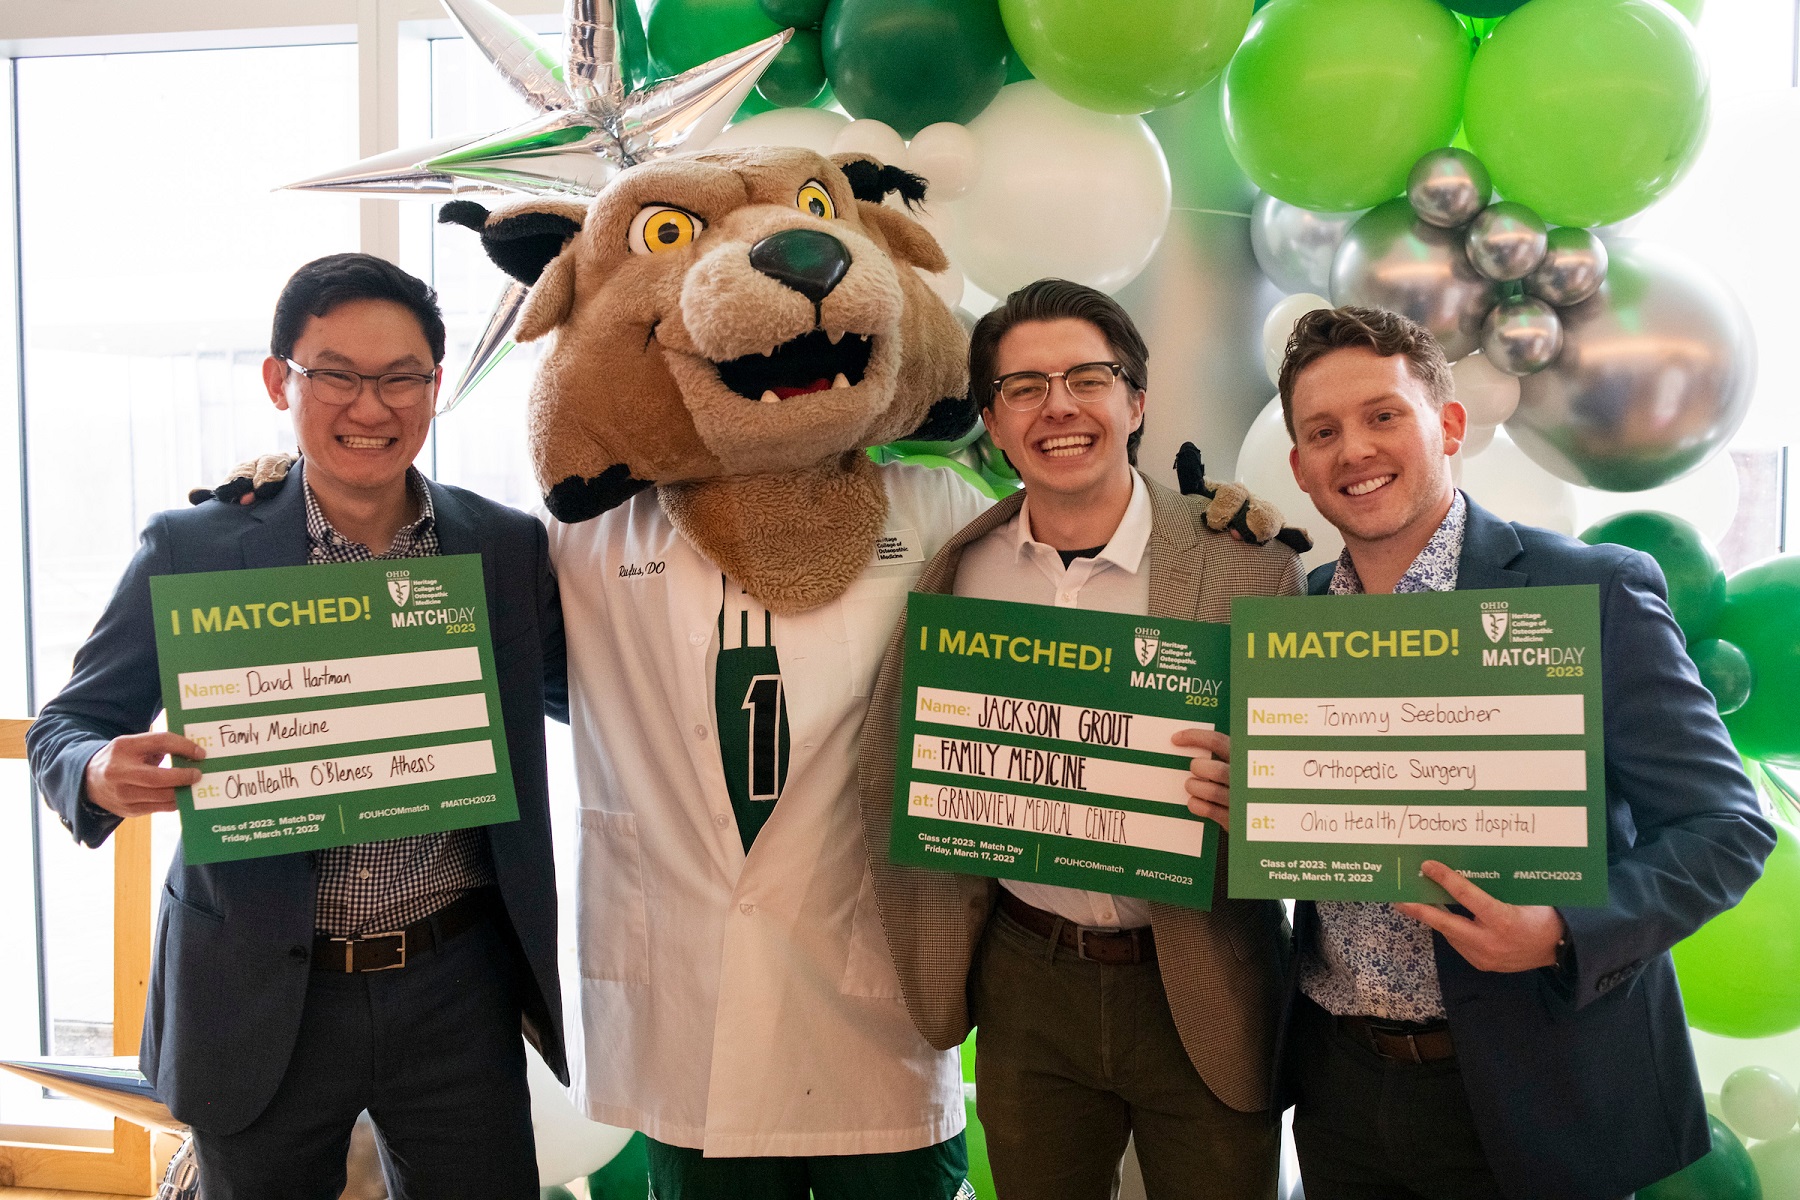 OHIO students are shown with Rufus at Match Day